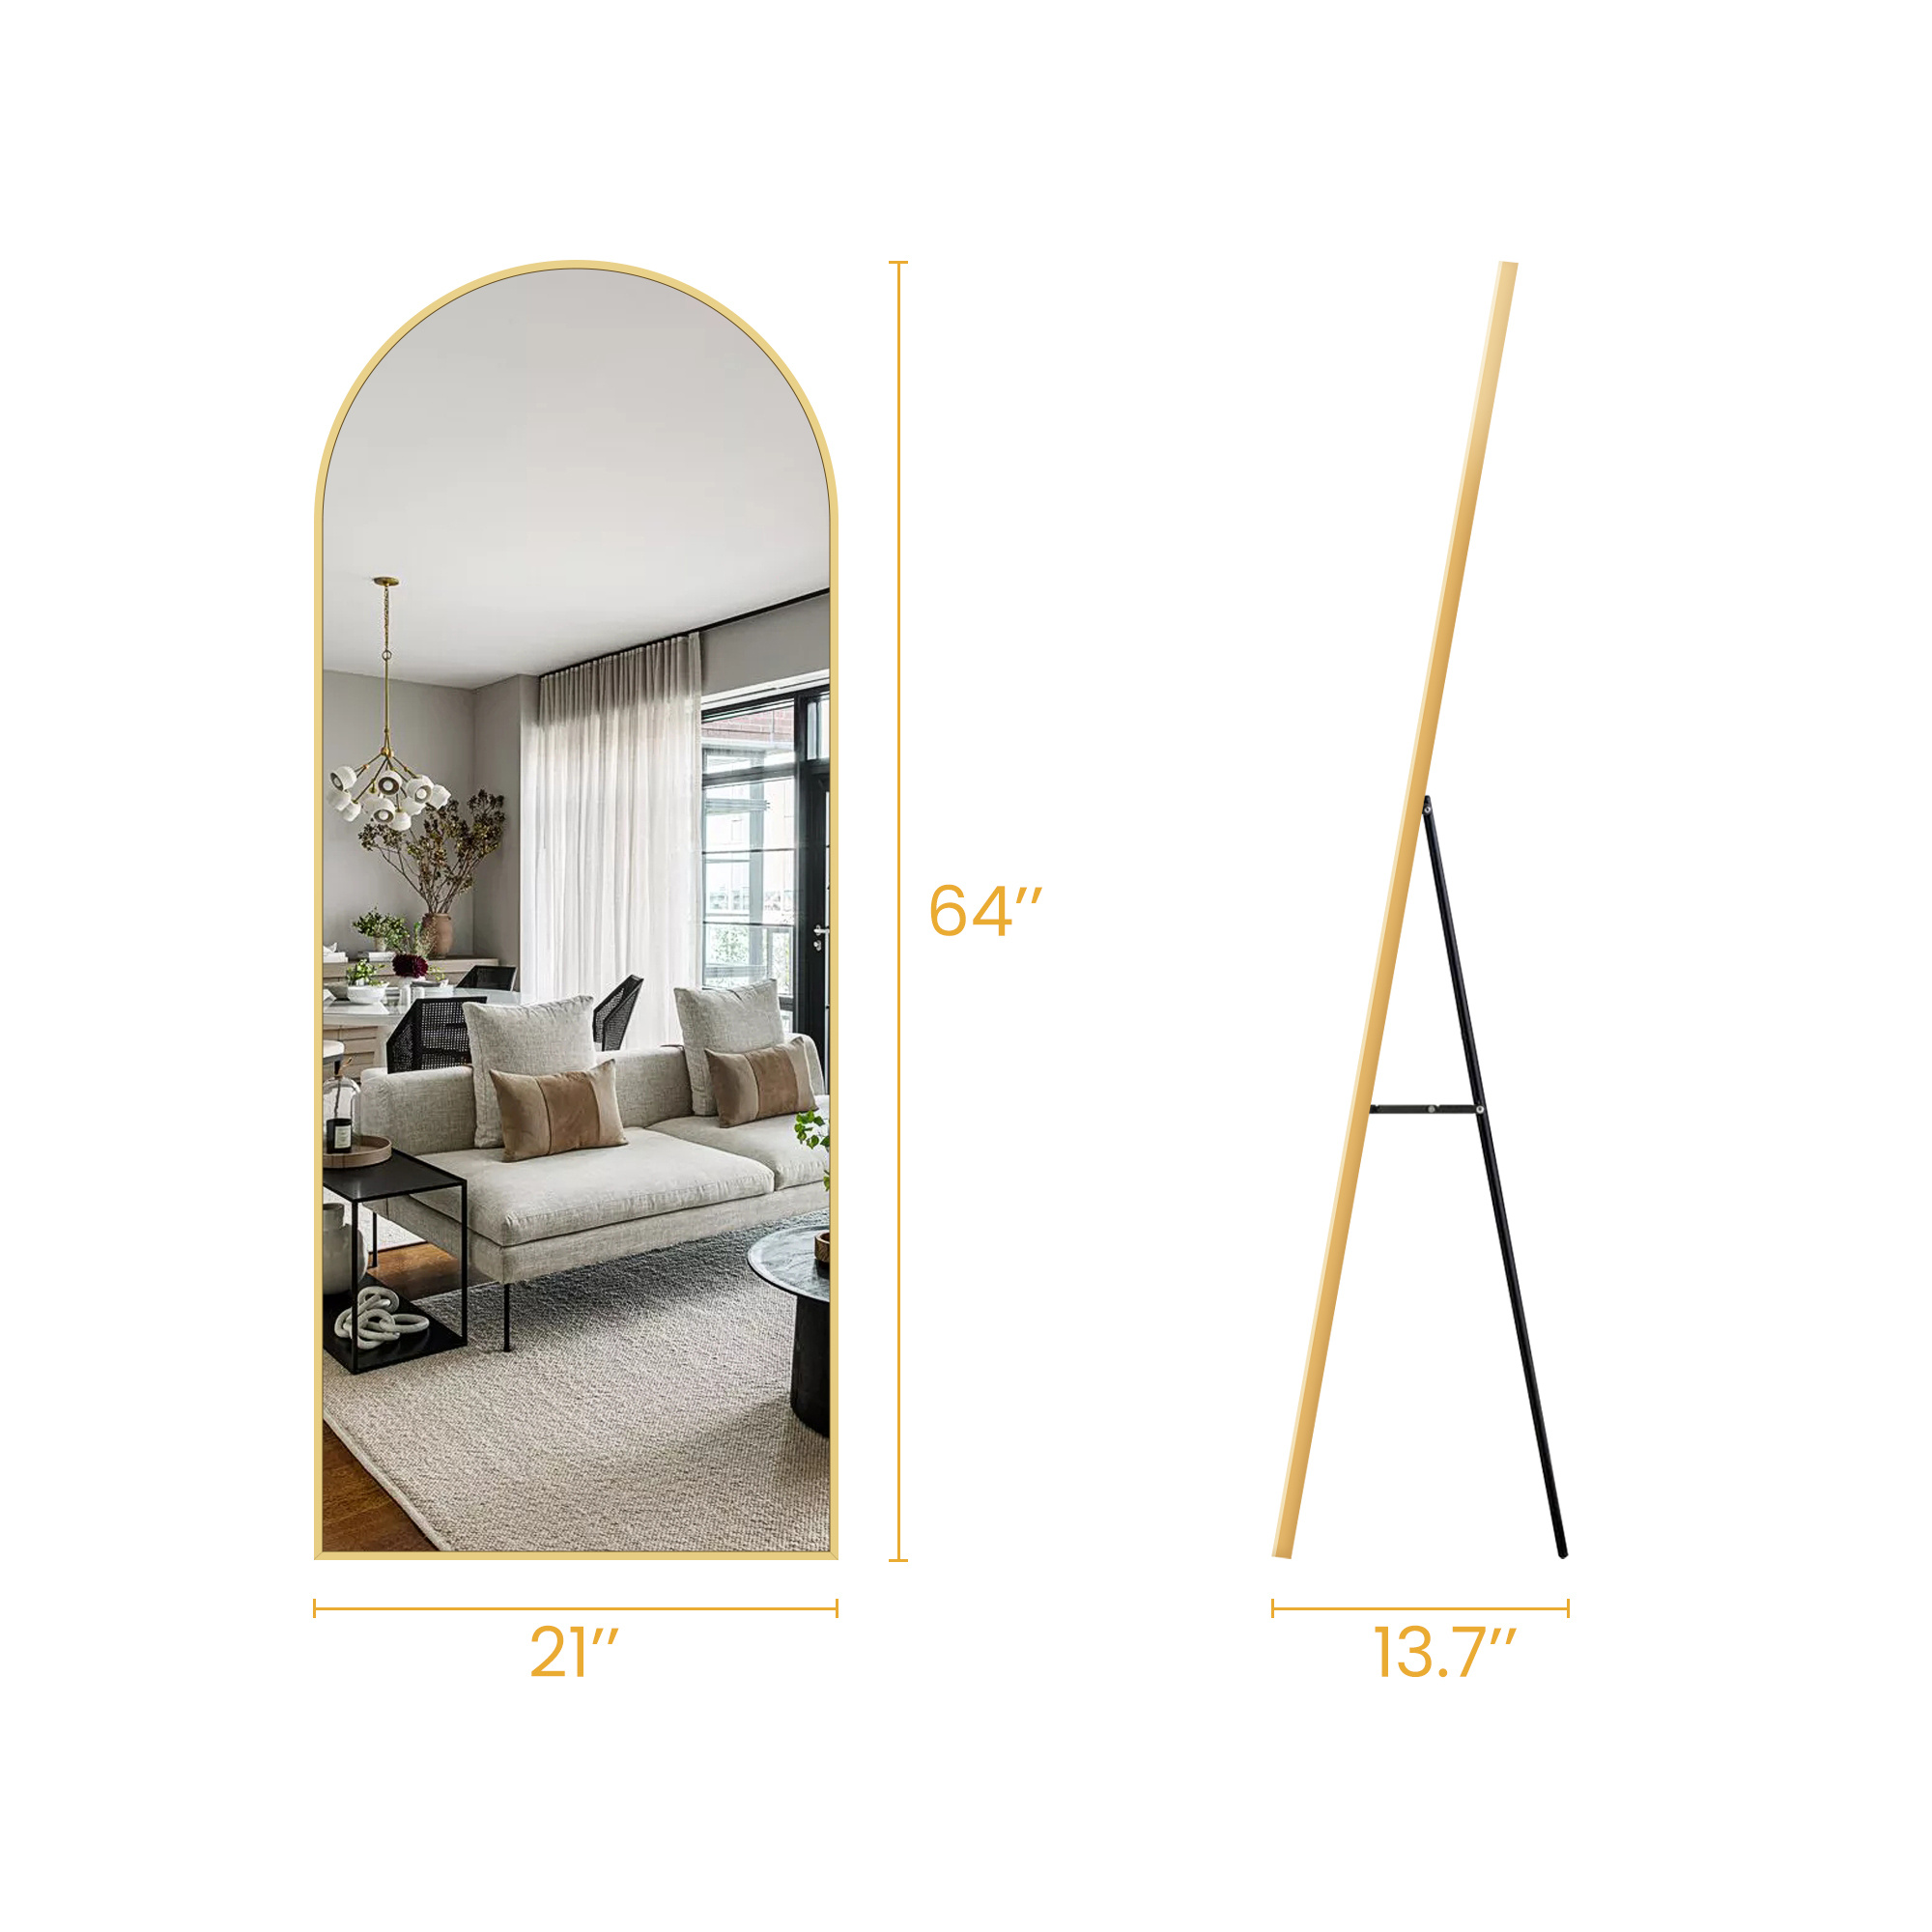 

Arched Full Length Mirror Black&gold Full Body Floor Mirror Standing Hanging Or Leaning Wall, Wall Mounted Mirror With Stand Aluminum Alloy Thin Frame For Bedroom Cloakroom,bathroom